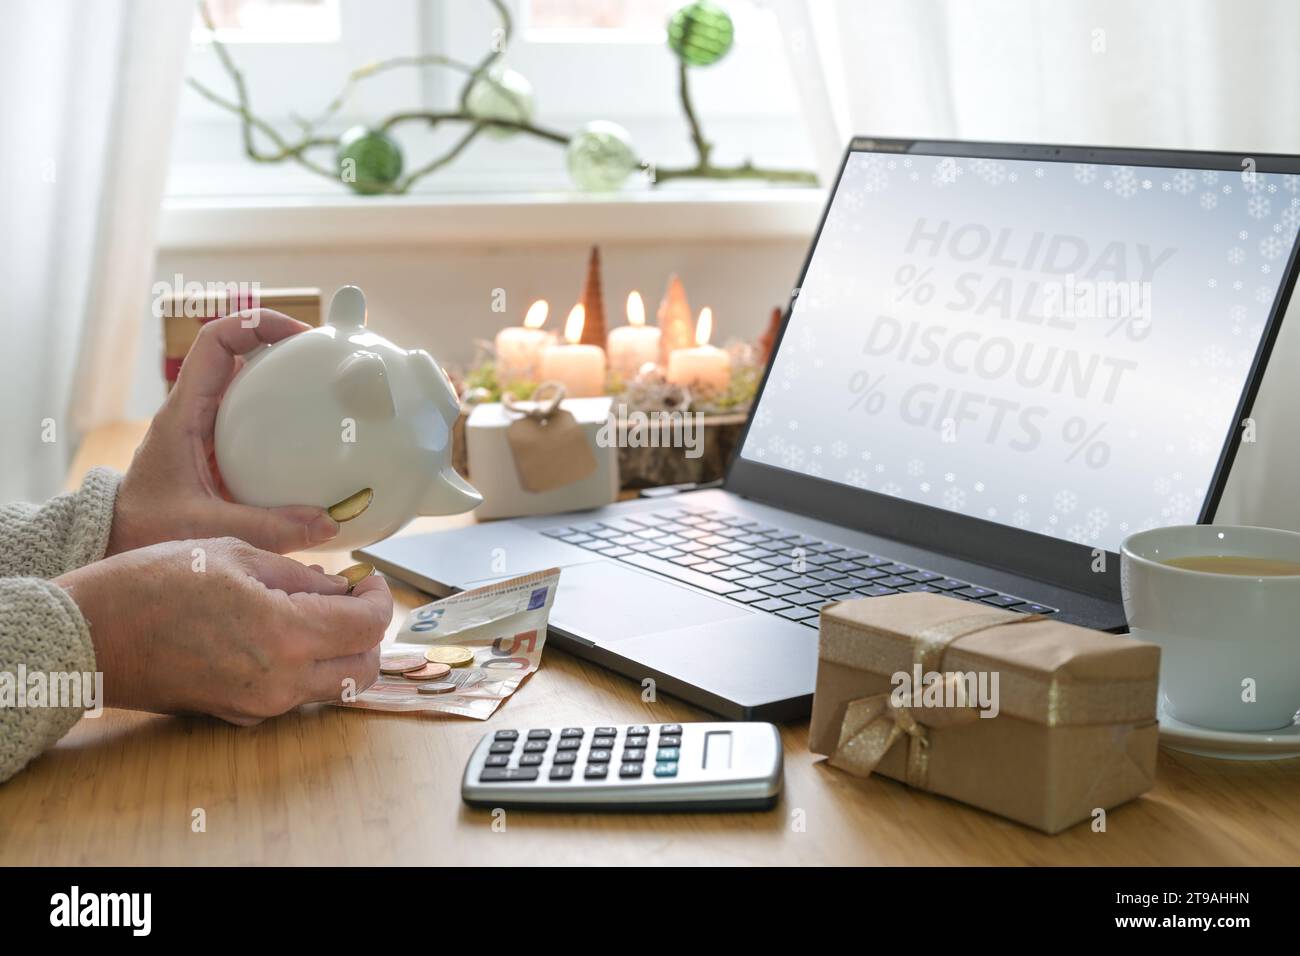 Womans hands shaking coins out of a piggy bank while shopping online for Christmas presents to take advantage of holiday discount offers on a table wi Stock Photo